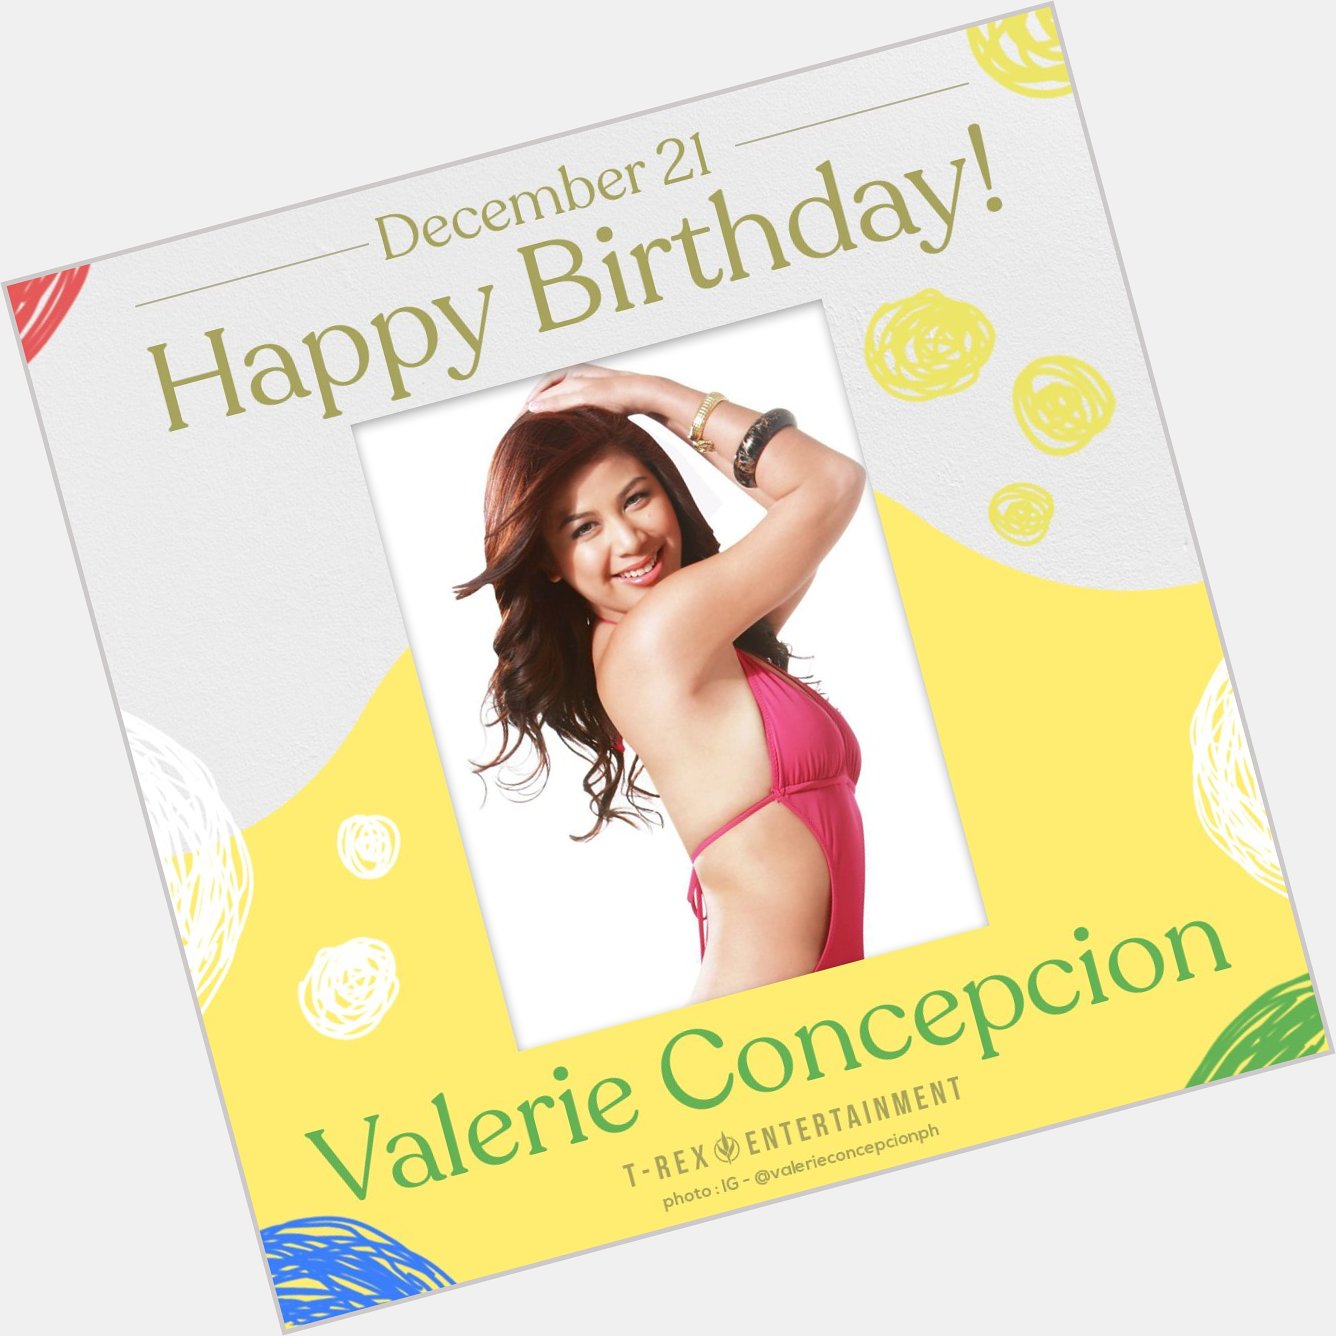 Happy birthday to you, Valerie Concepcion! We wish you happiness and continued blessings in life. :) 